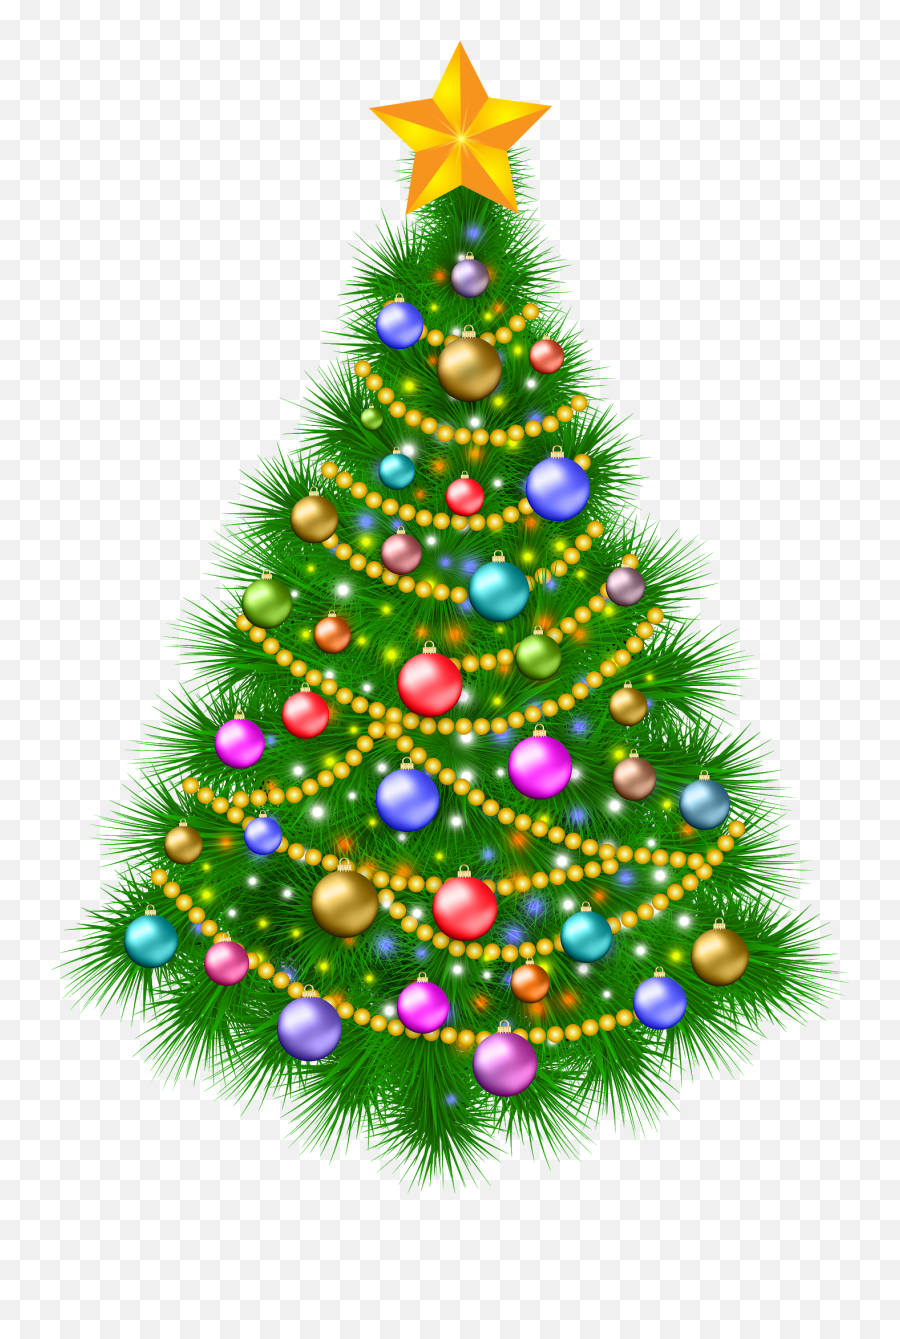 Pngsector - Christmas Tree Transparent Background,Christmas Transparent